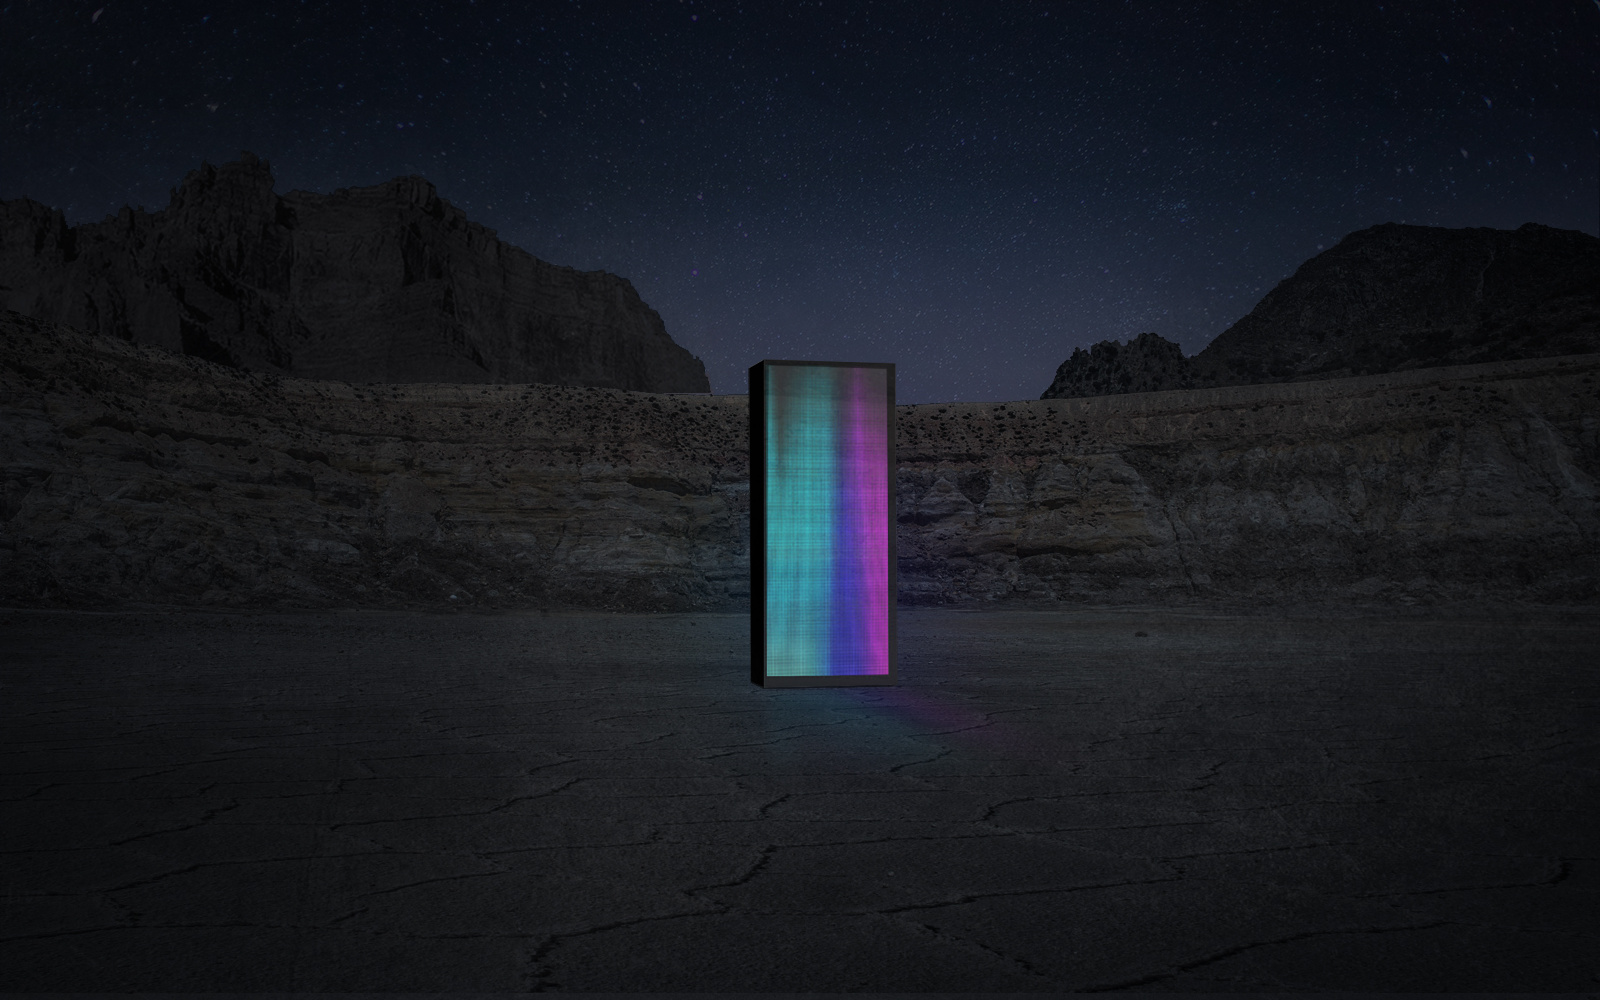 Colorful illuminated LED sculpture in the wild under starry sky.